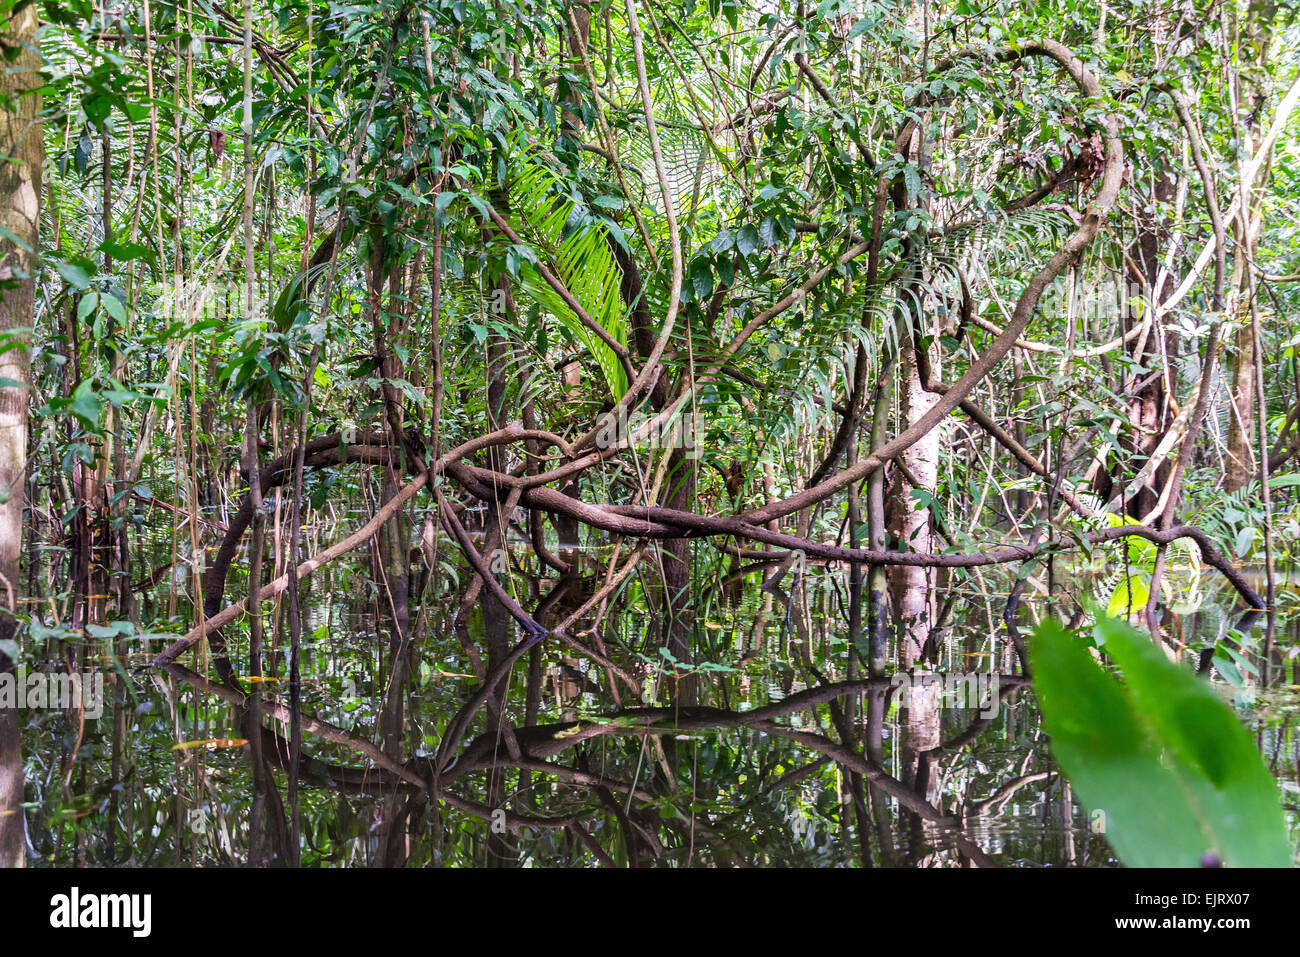 Jungles vines reflected in water in the Amazon rainforest near Iquitos, Peru Stock Photo